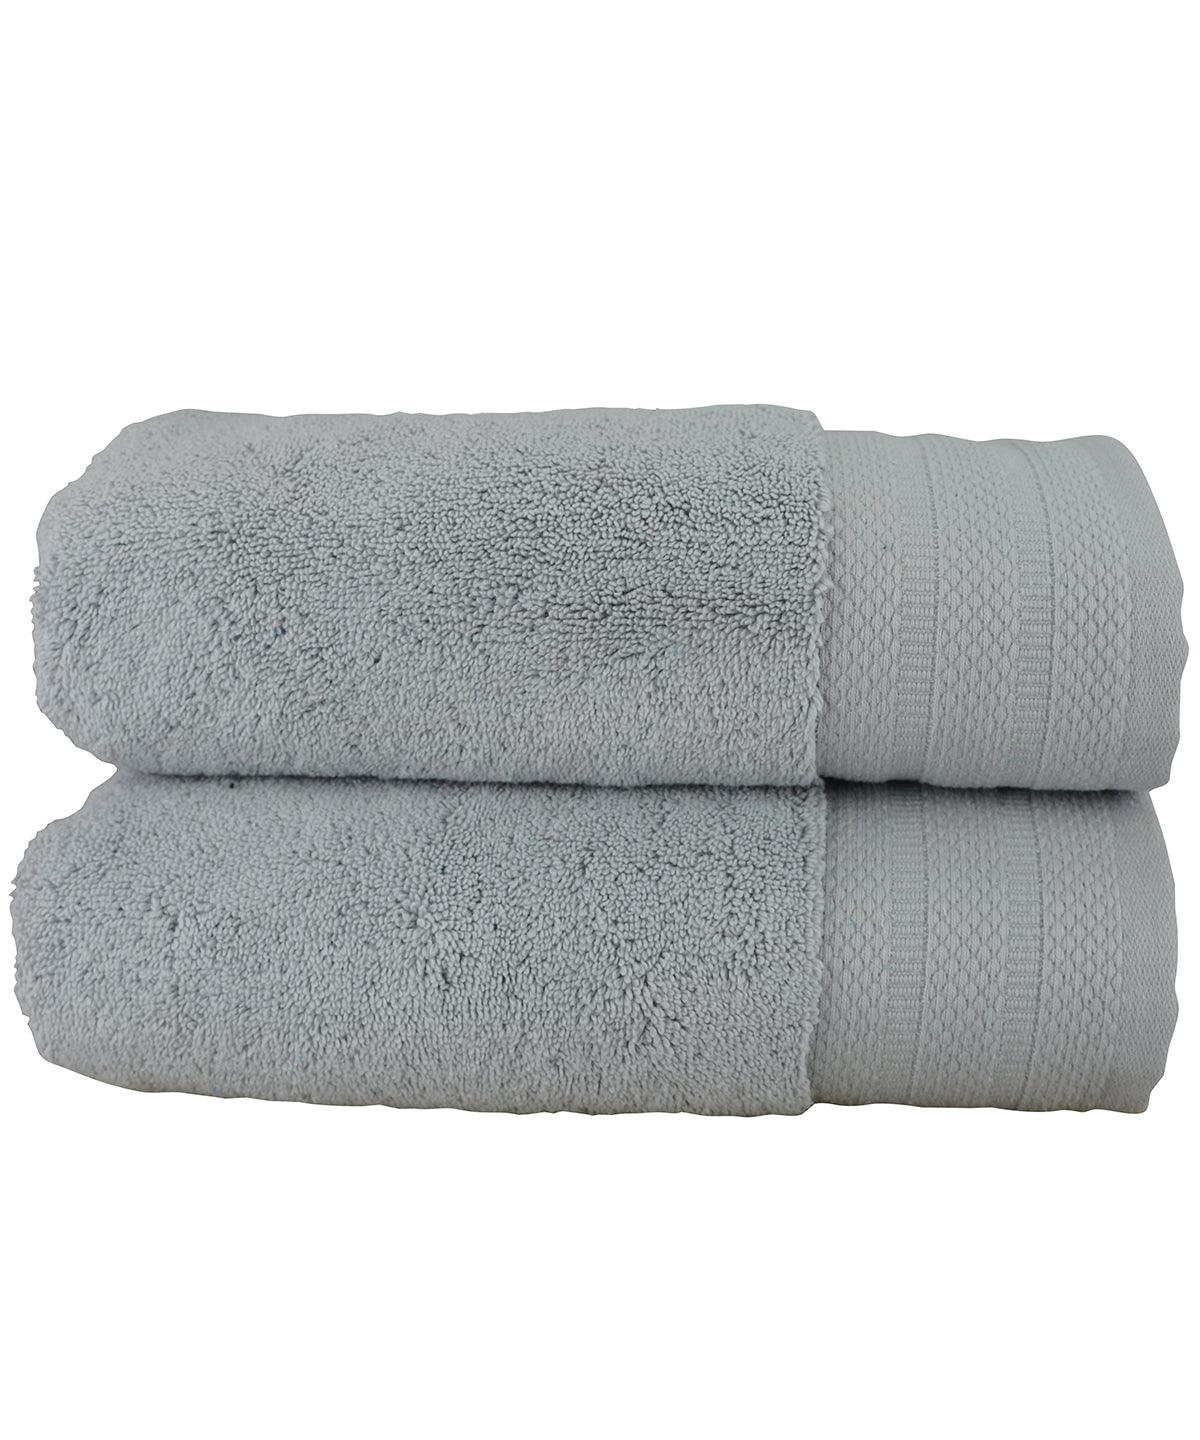 Pure Grey - ARTG® Pure luxe hand towel Towels A&R Towels Gifting & Accessories, Homewares & Towelling Schoolwear Centres